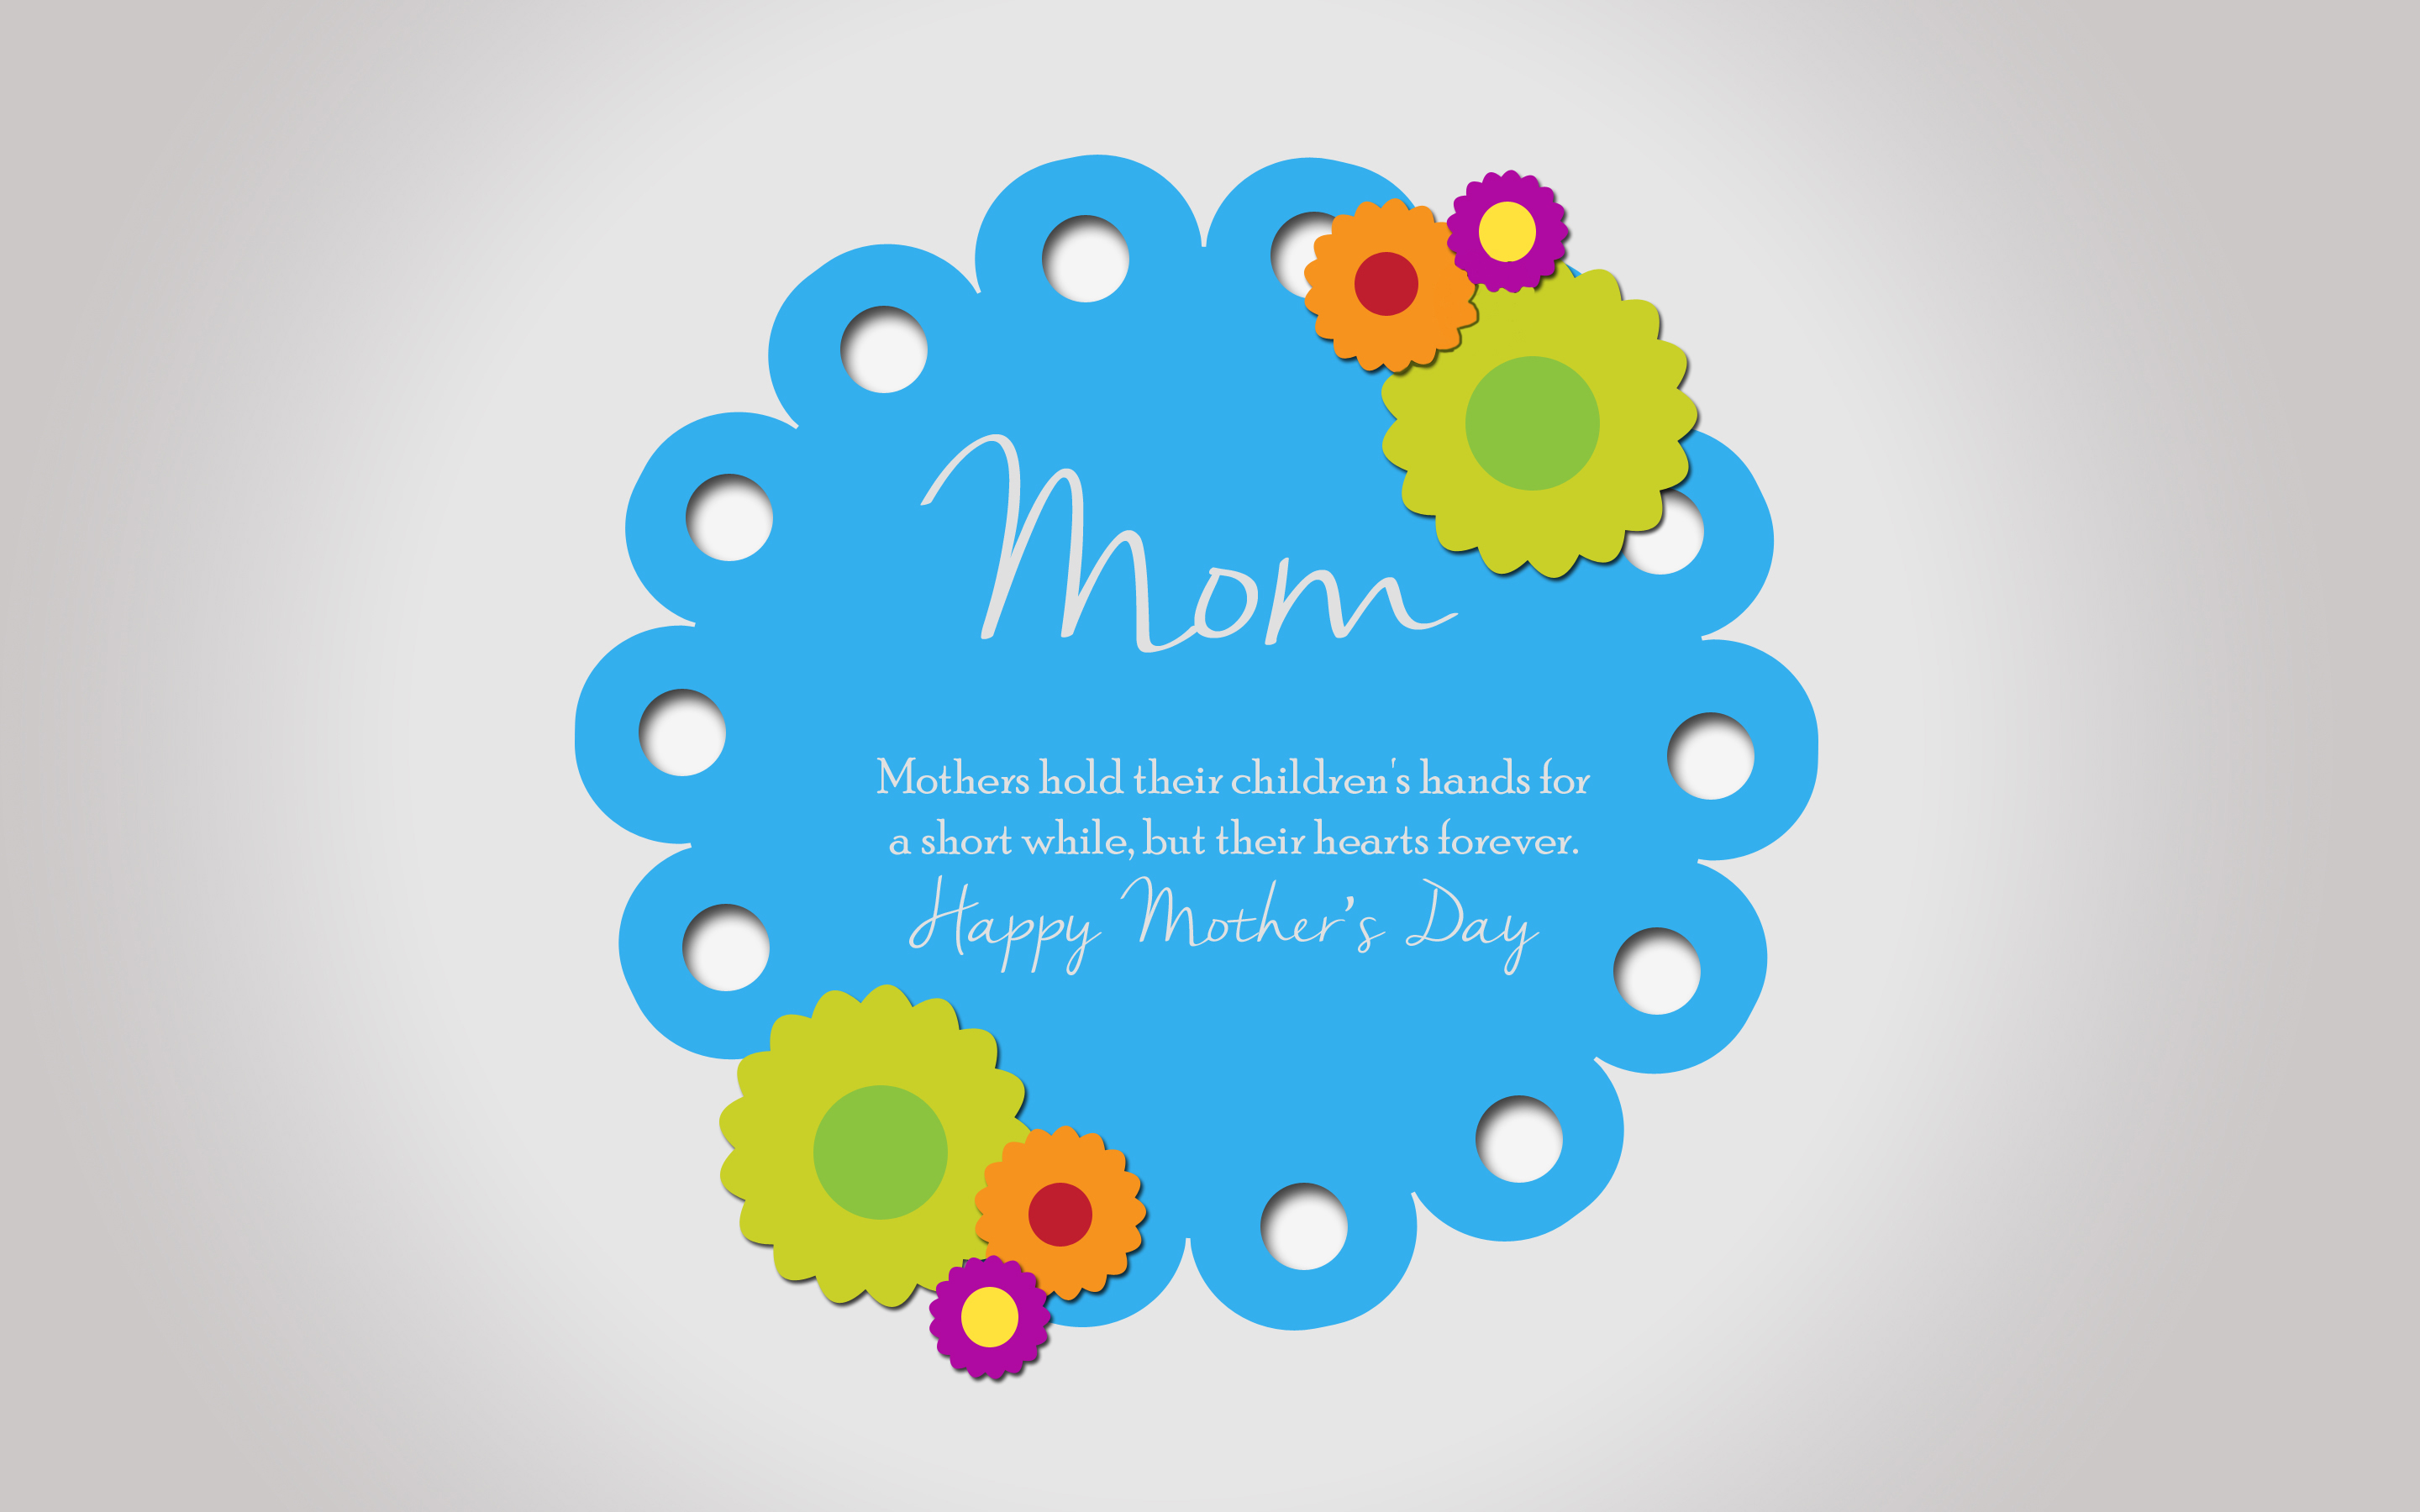 Happy Mothers Day Wishes HD Wallpaper - New HD Wallpapers